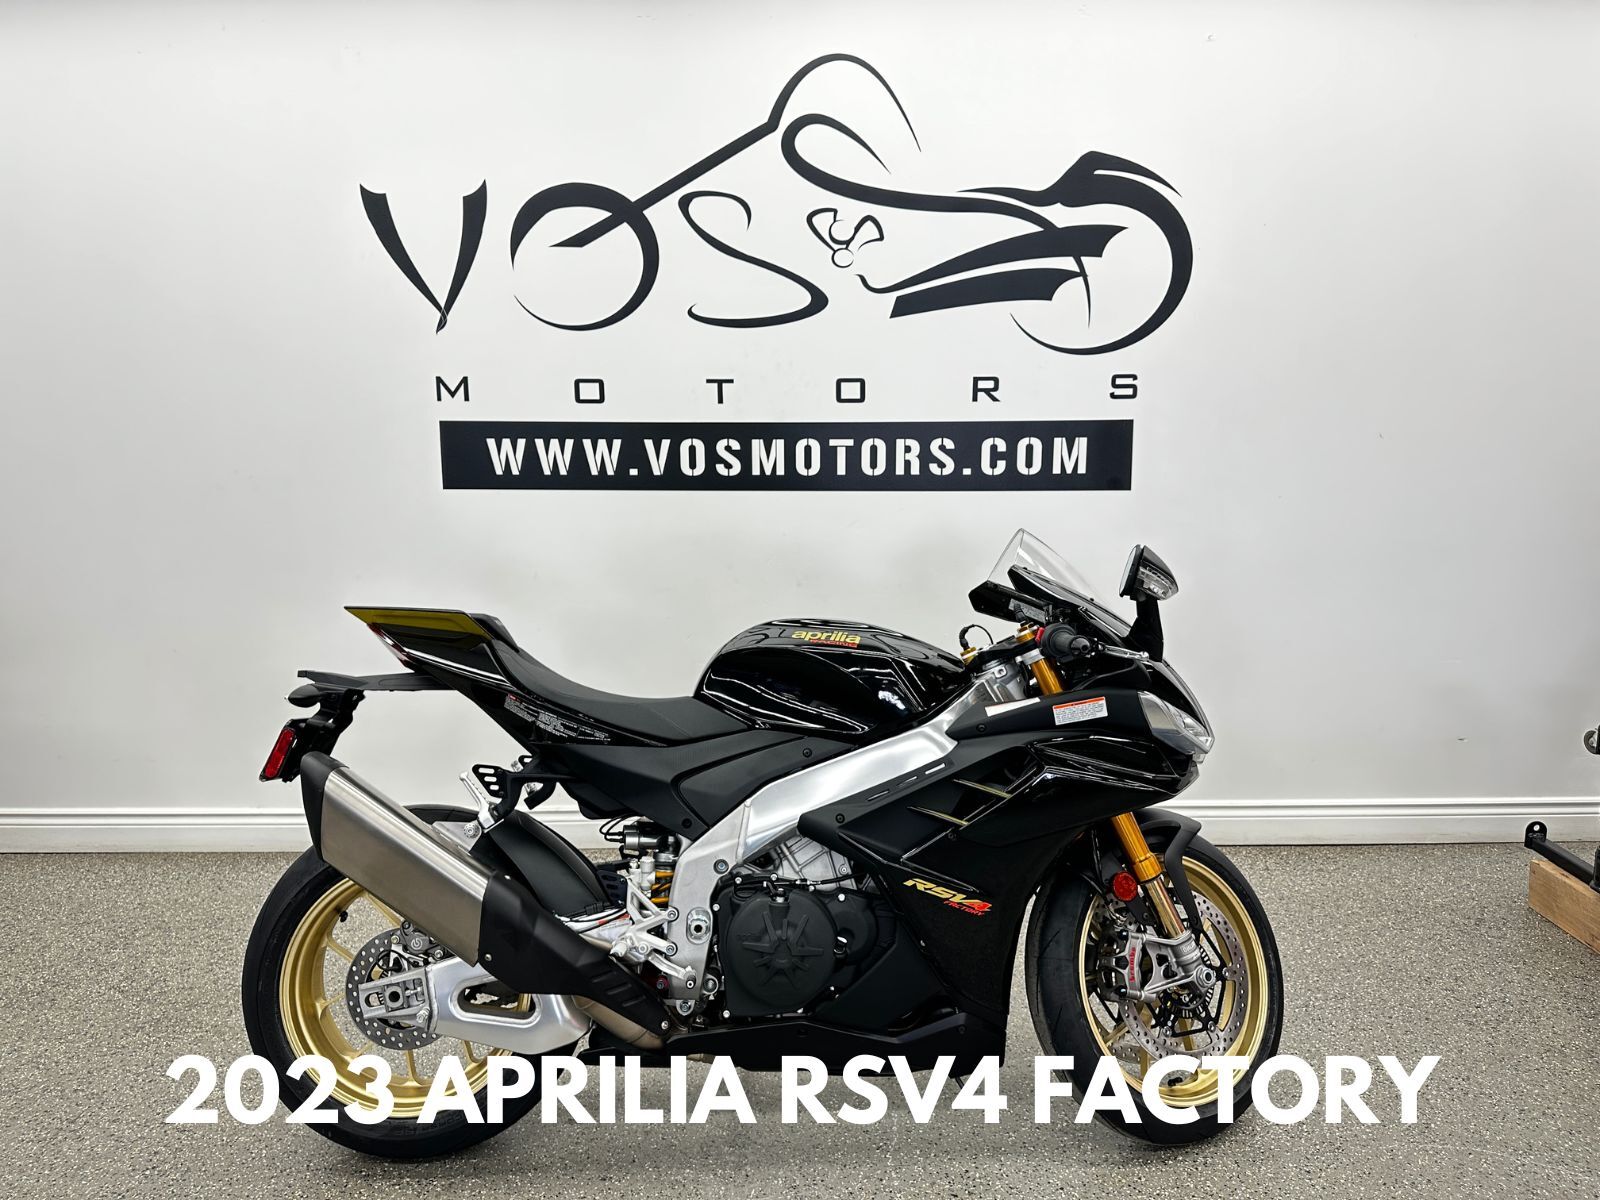 2023 Aprilia RSV4 Factory APRC My 23 - V5671NP - -No Payments for 1 Year**